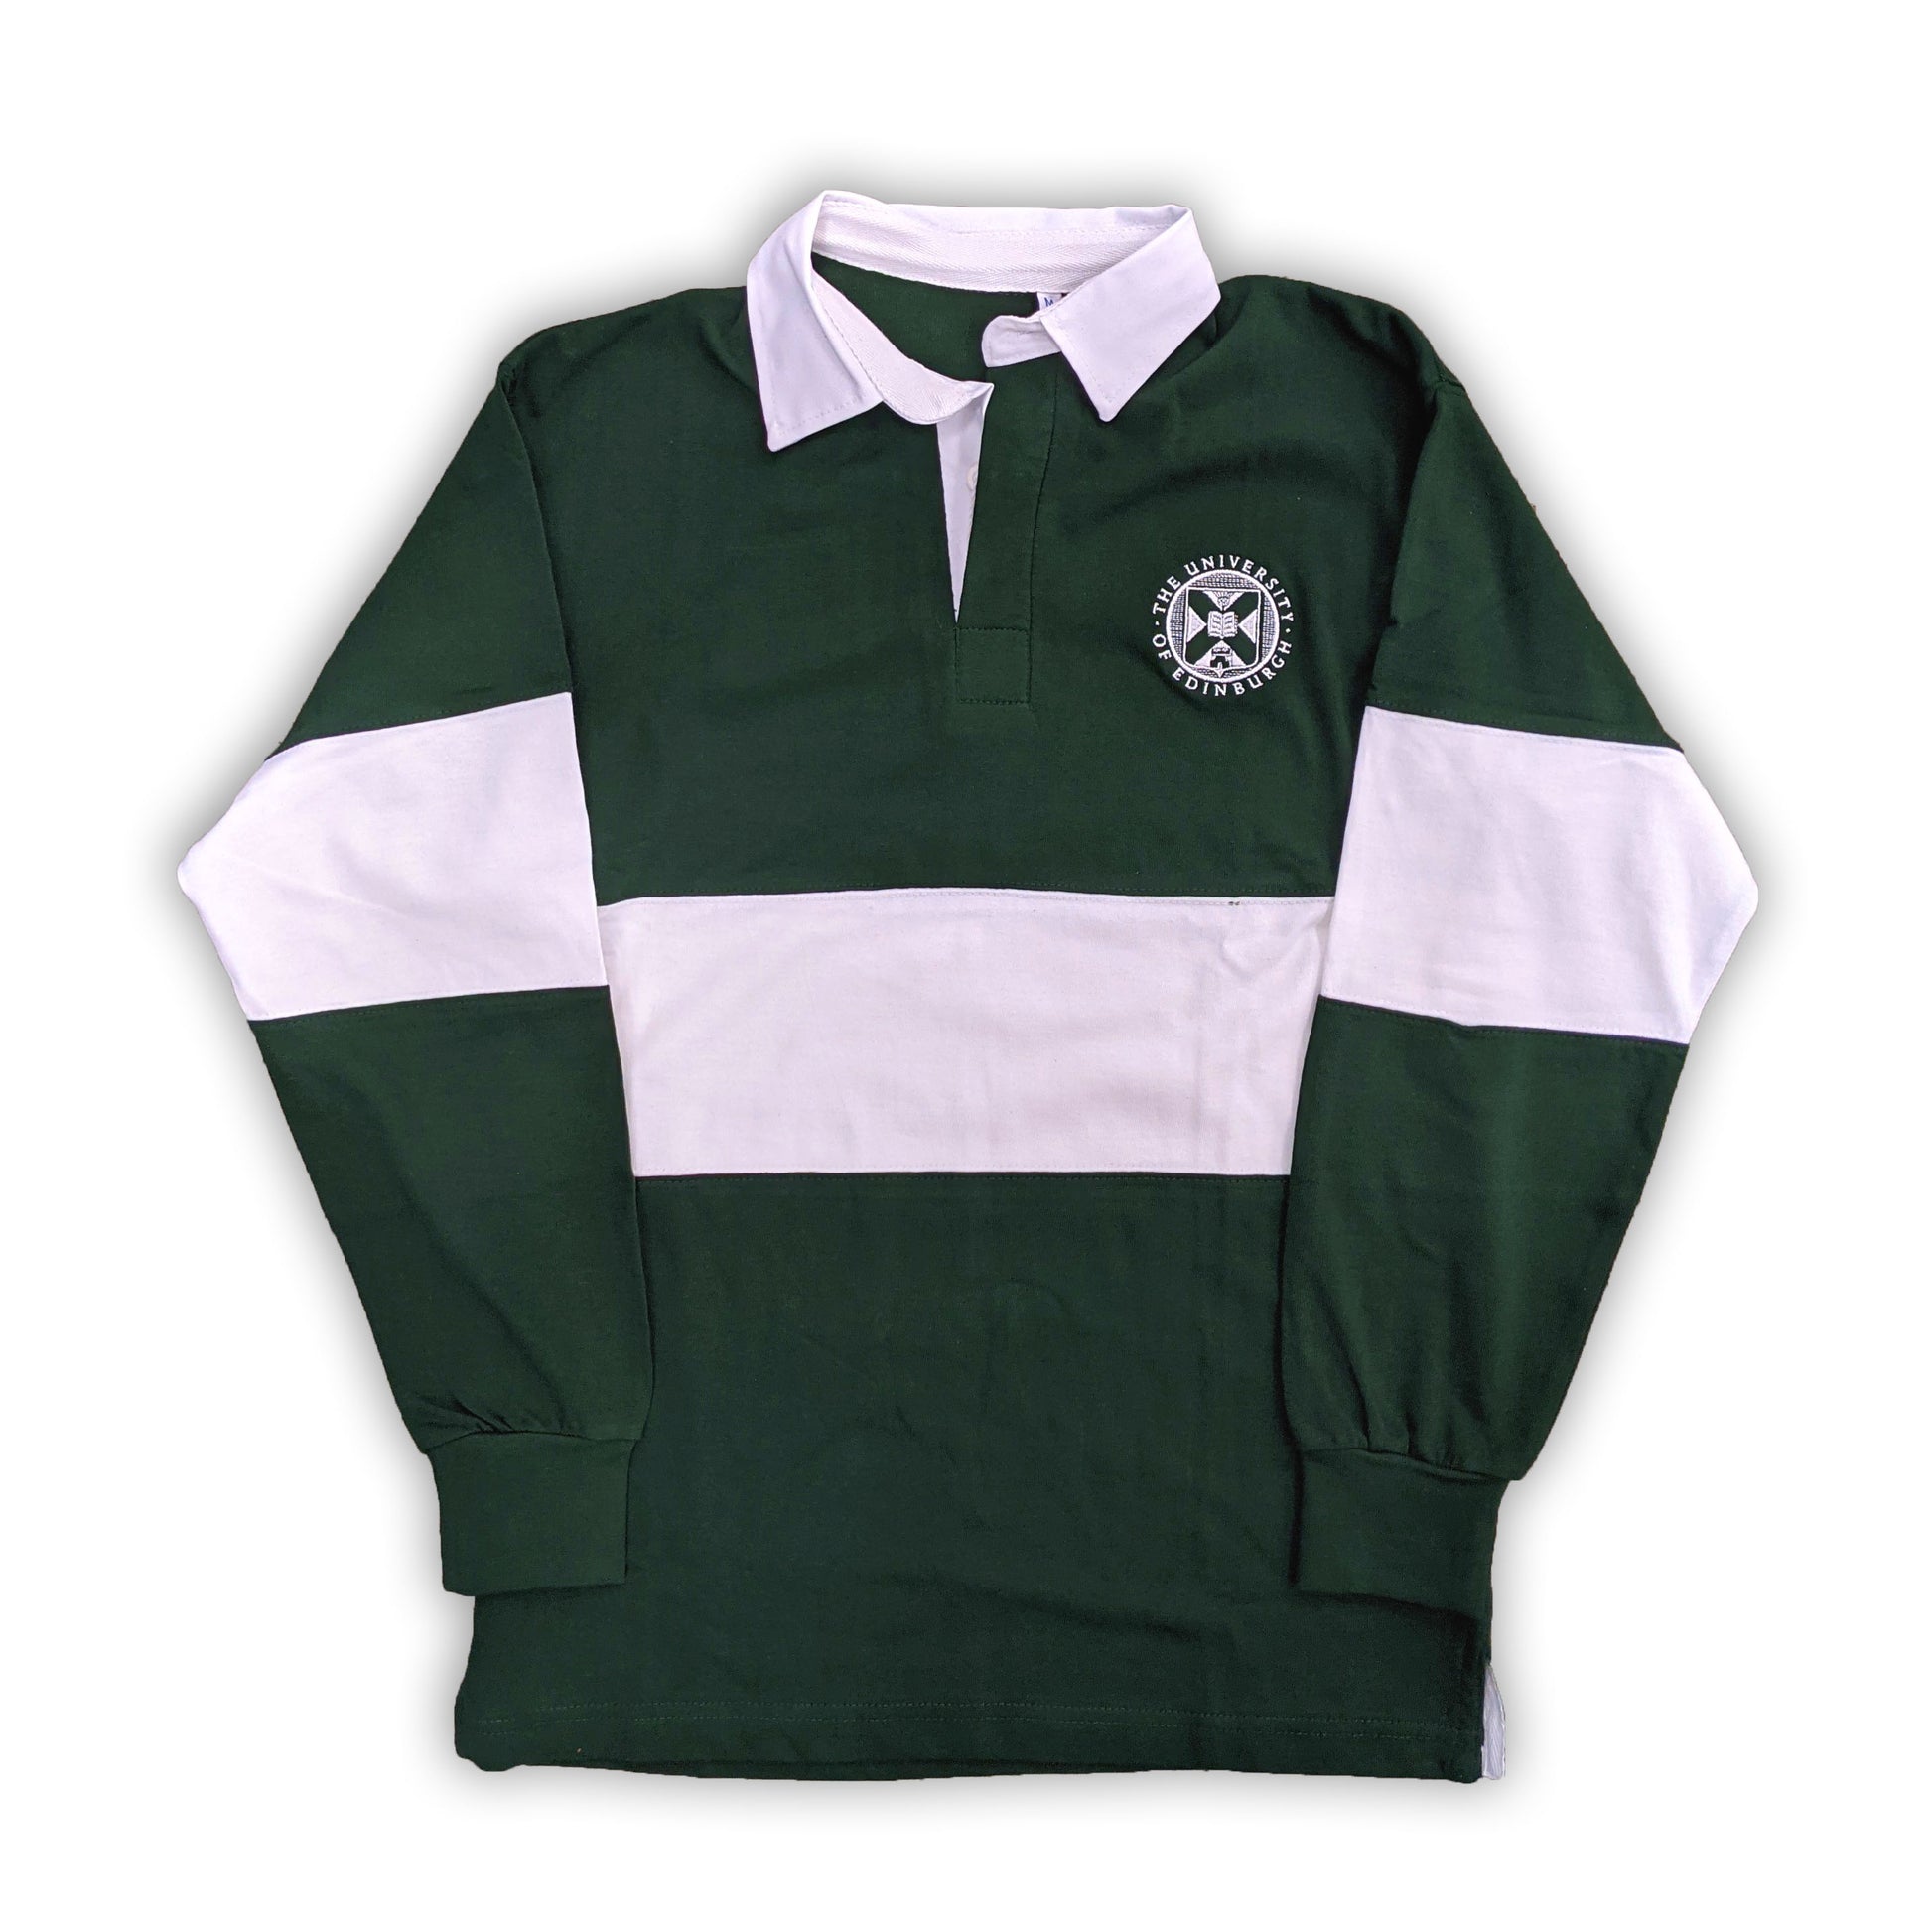 Bottle green rugby shirt with white paneling, white collar and white crest detailing. 